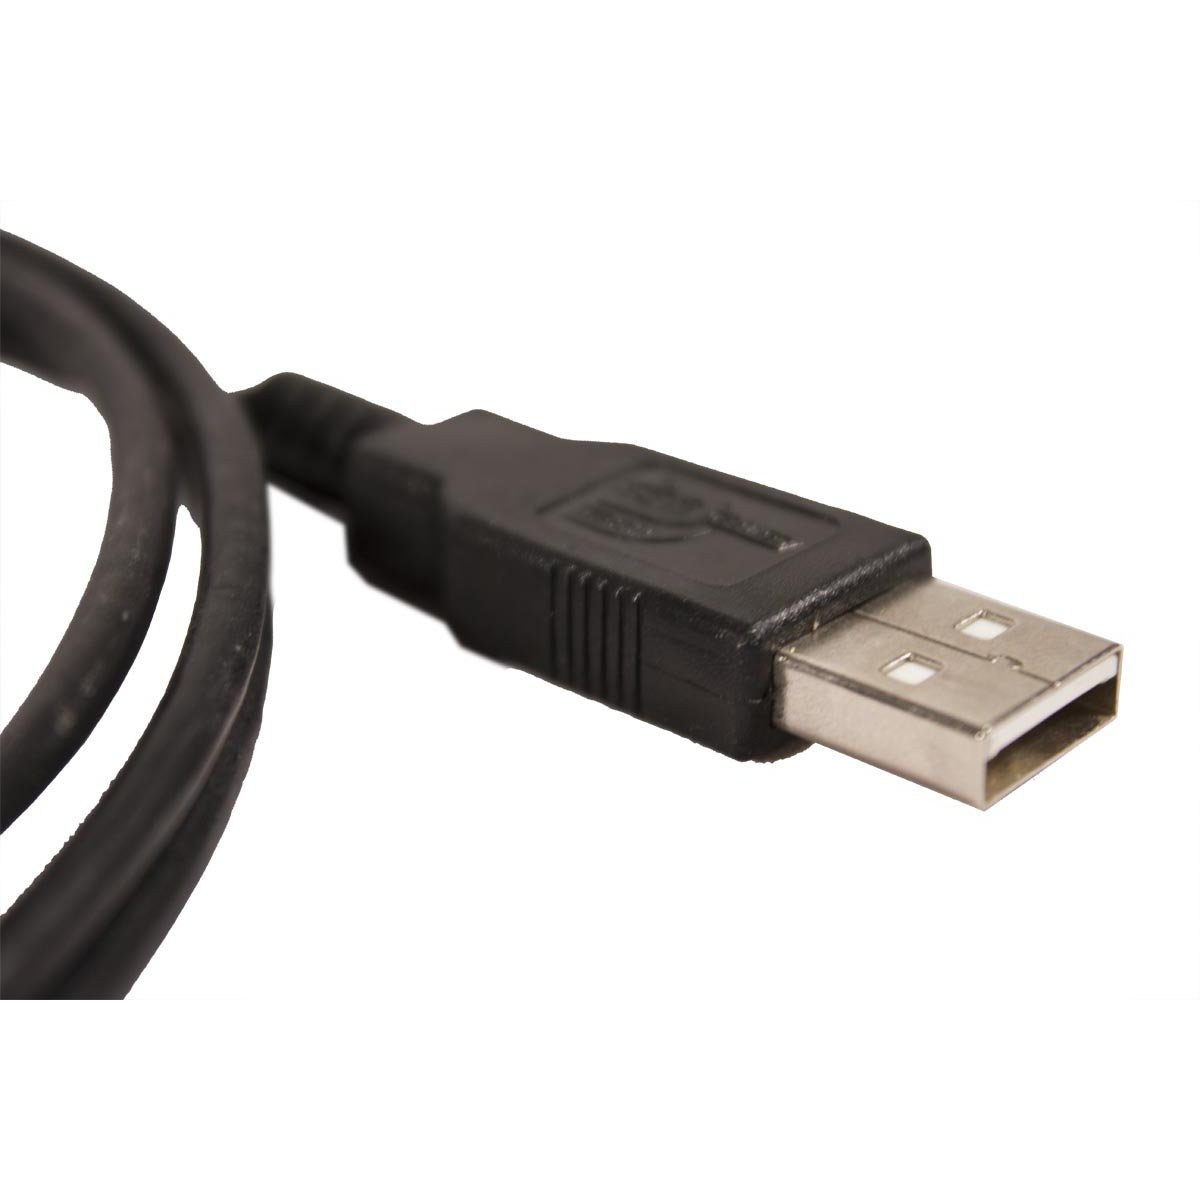 USB cable for Zytronic touch